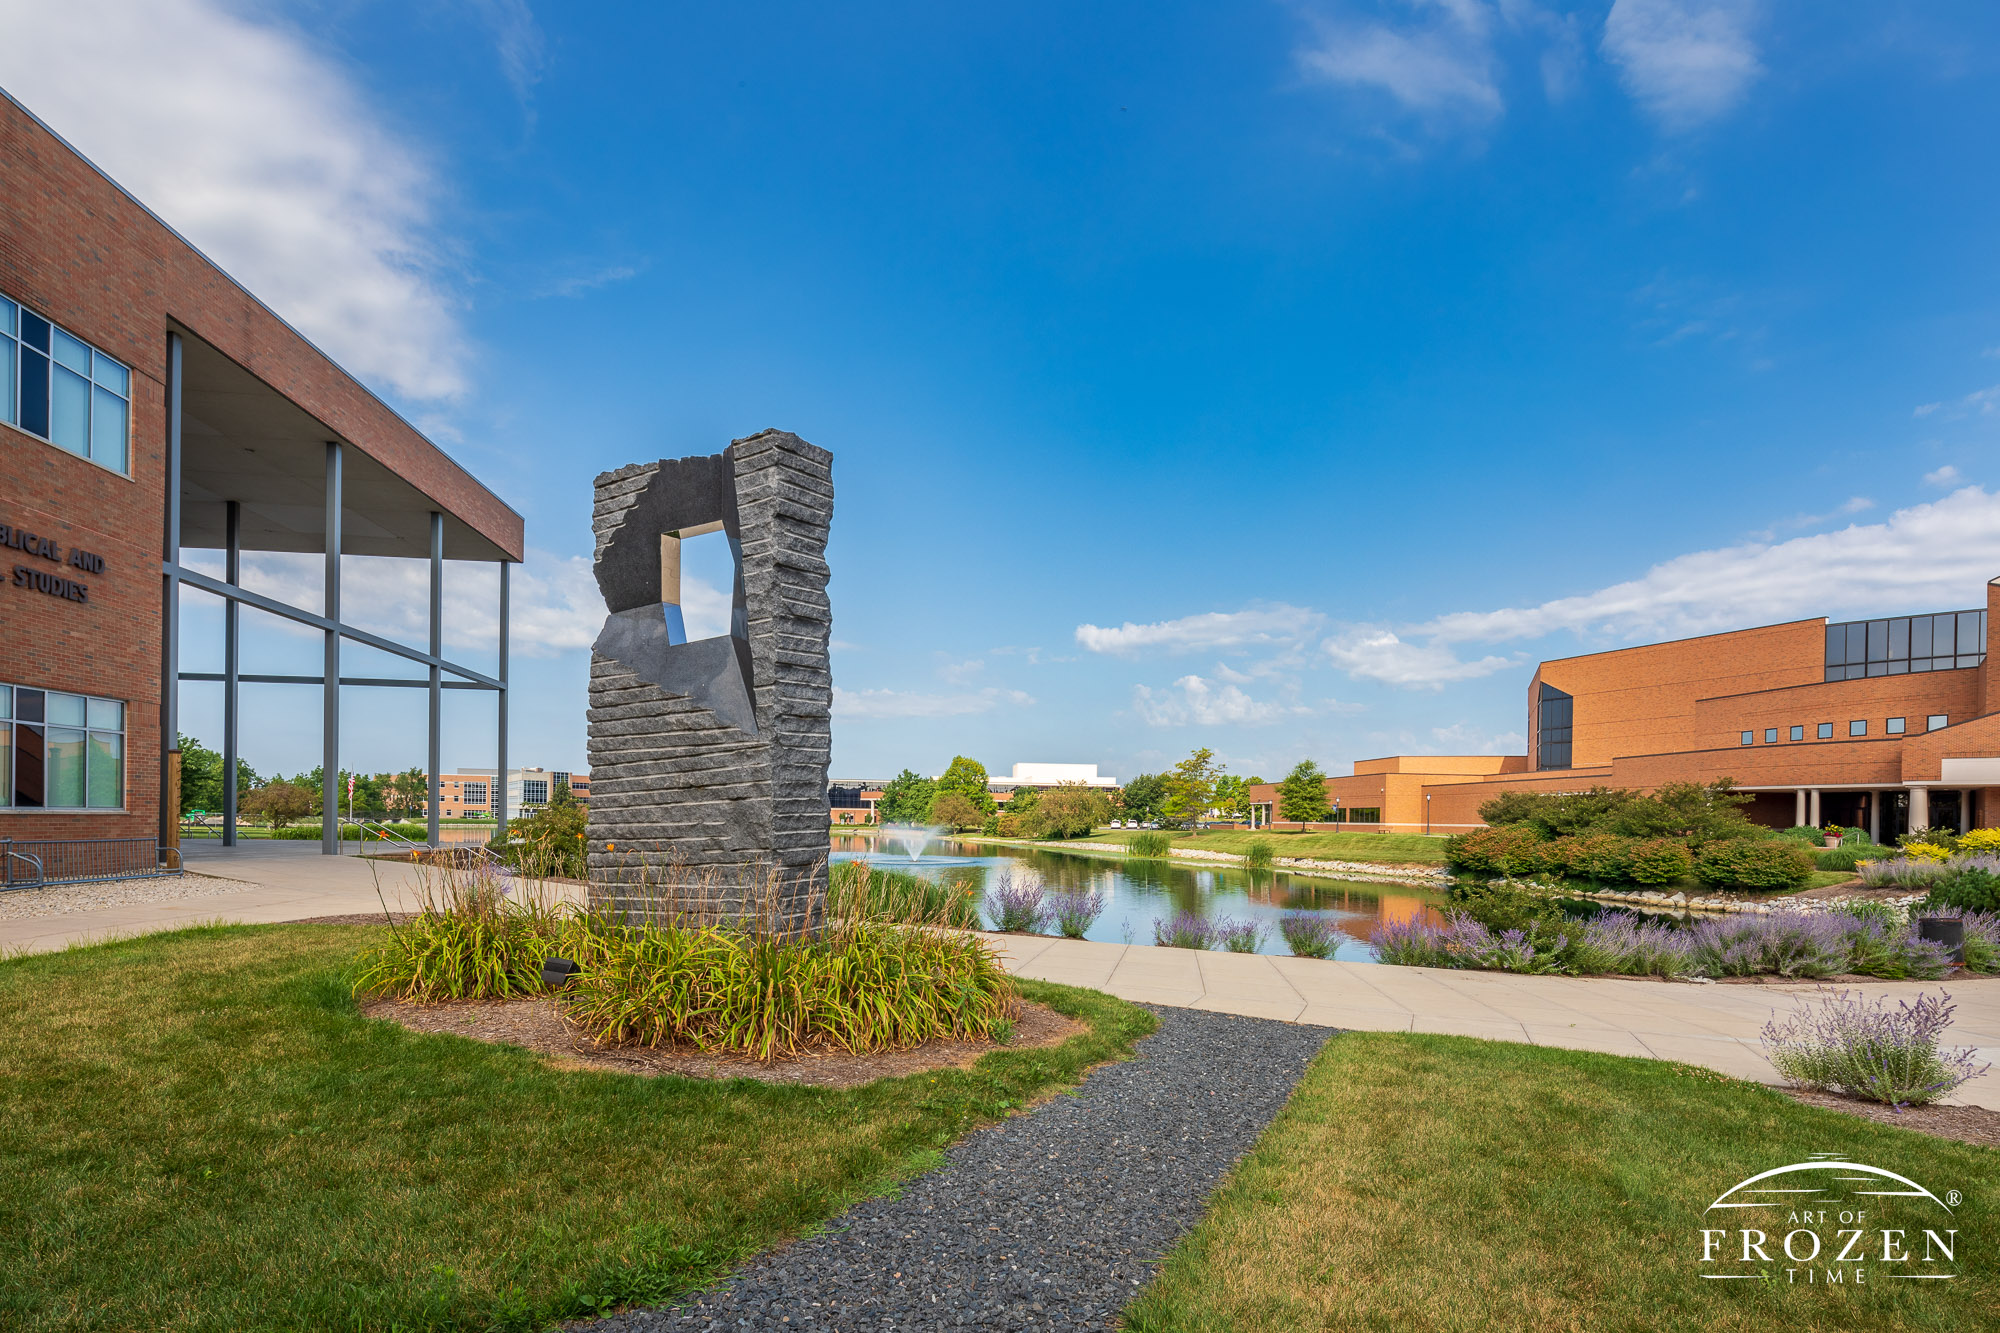 On Cedarville University’s immaculate campus resides this 16-foot granite sculpture with a stainless-steel accent in its portal